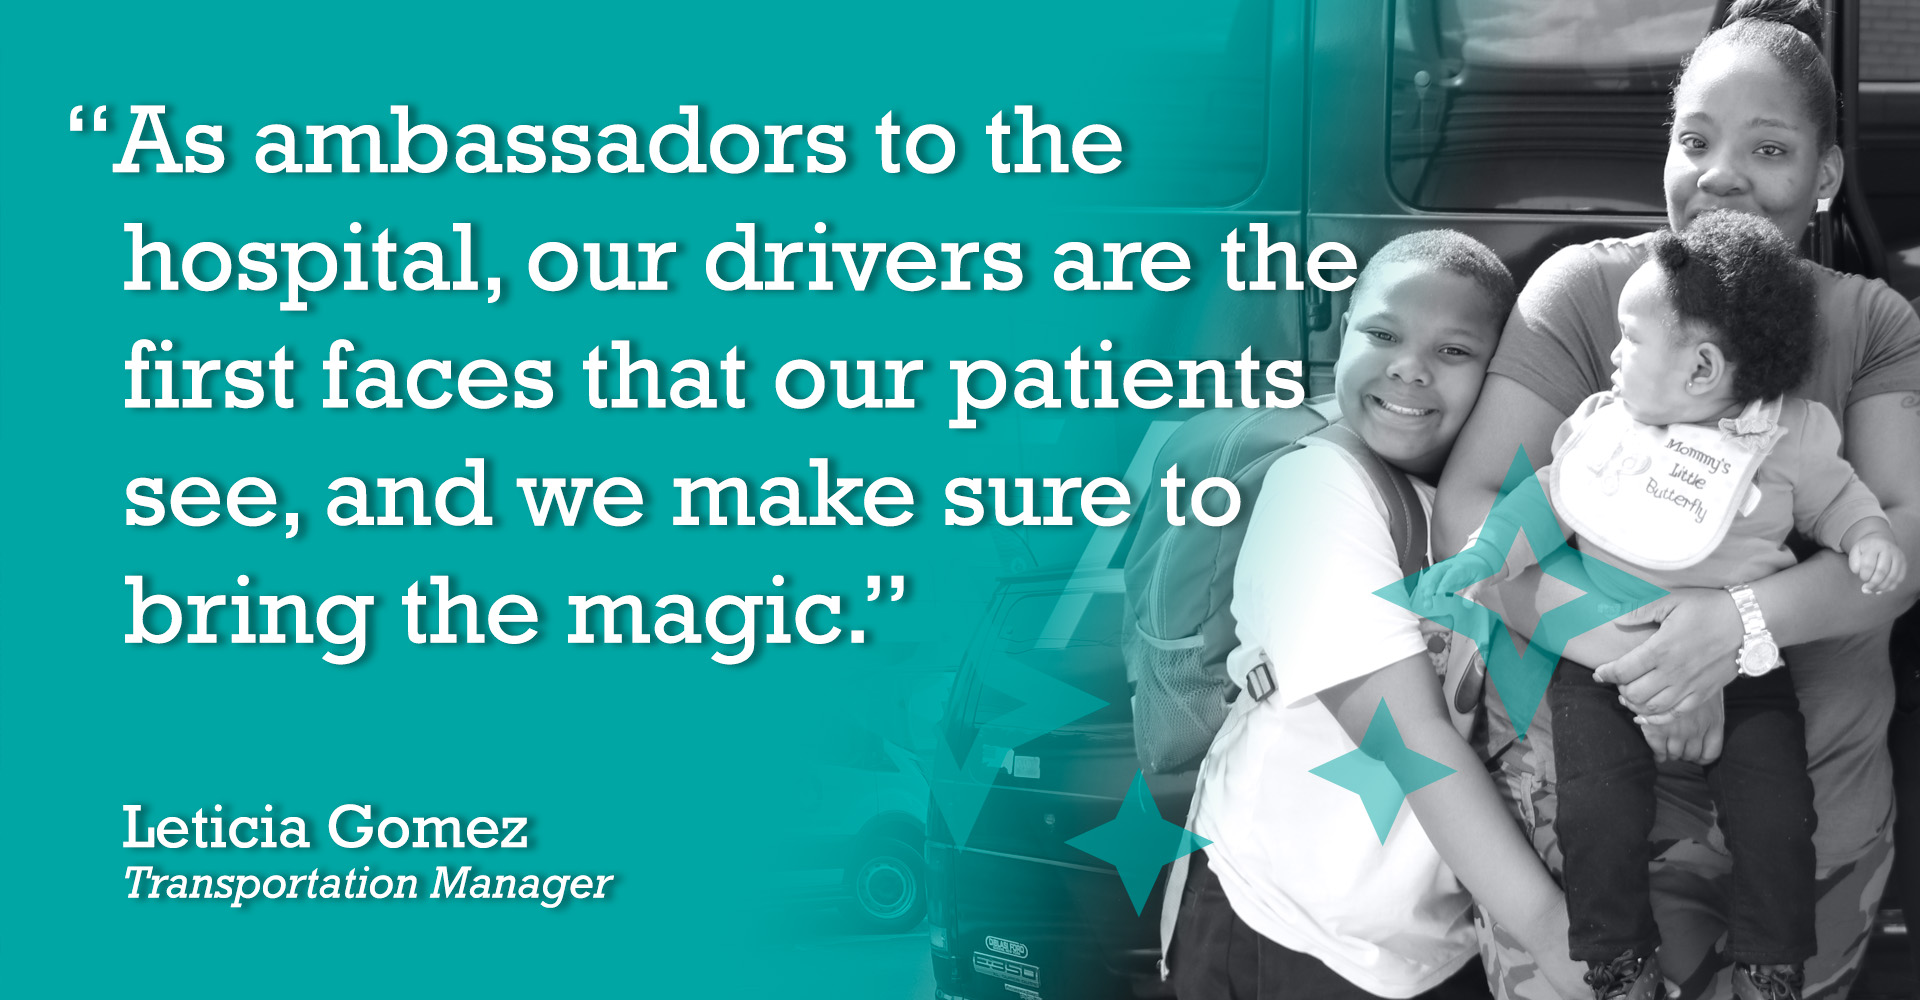 "As ambassadors to the hospital, our drivers are the first faces that our patients see, and we make sure to bring the magic." Leticia Gomez, Transportation Manager